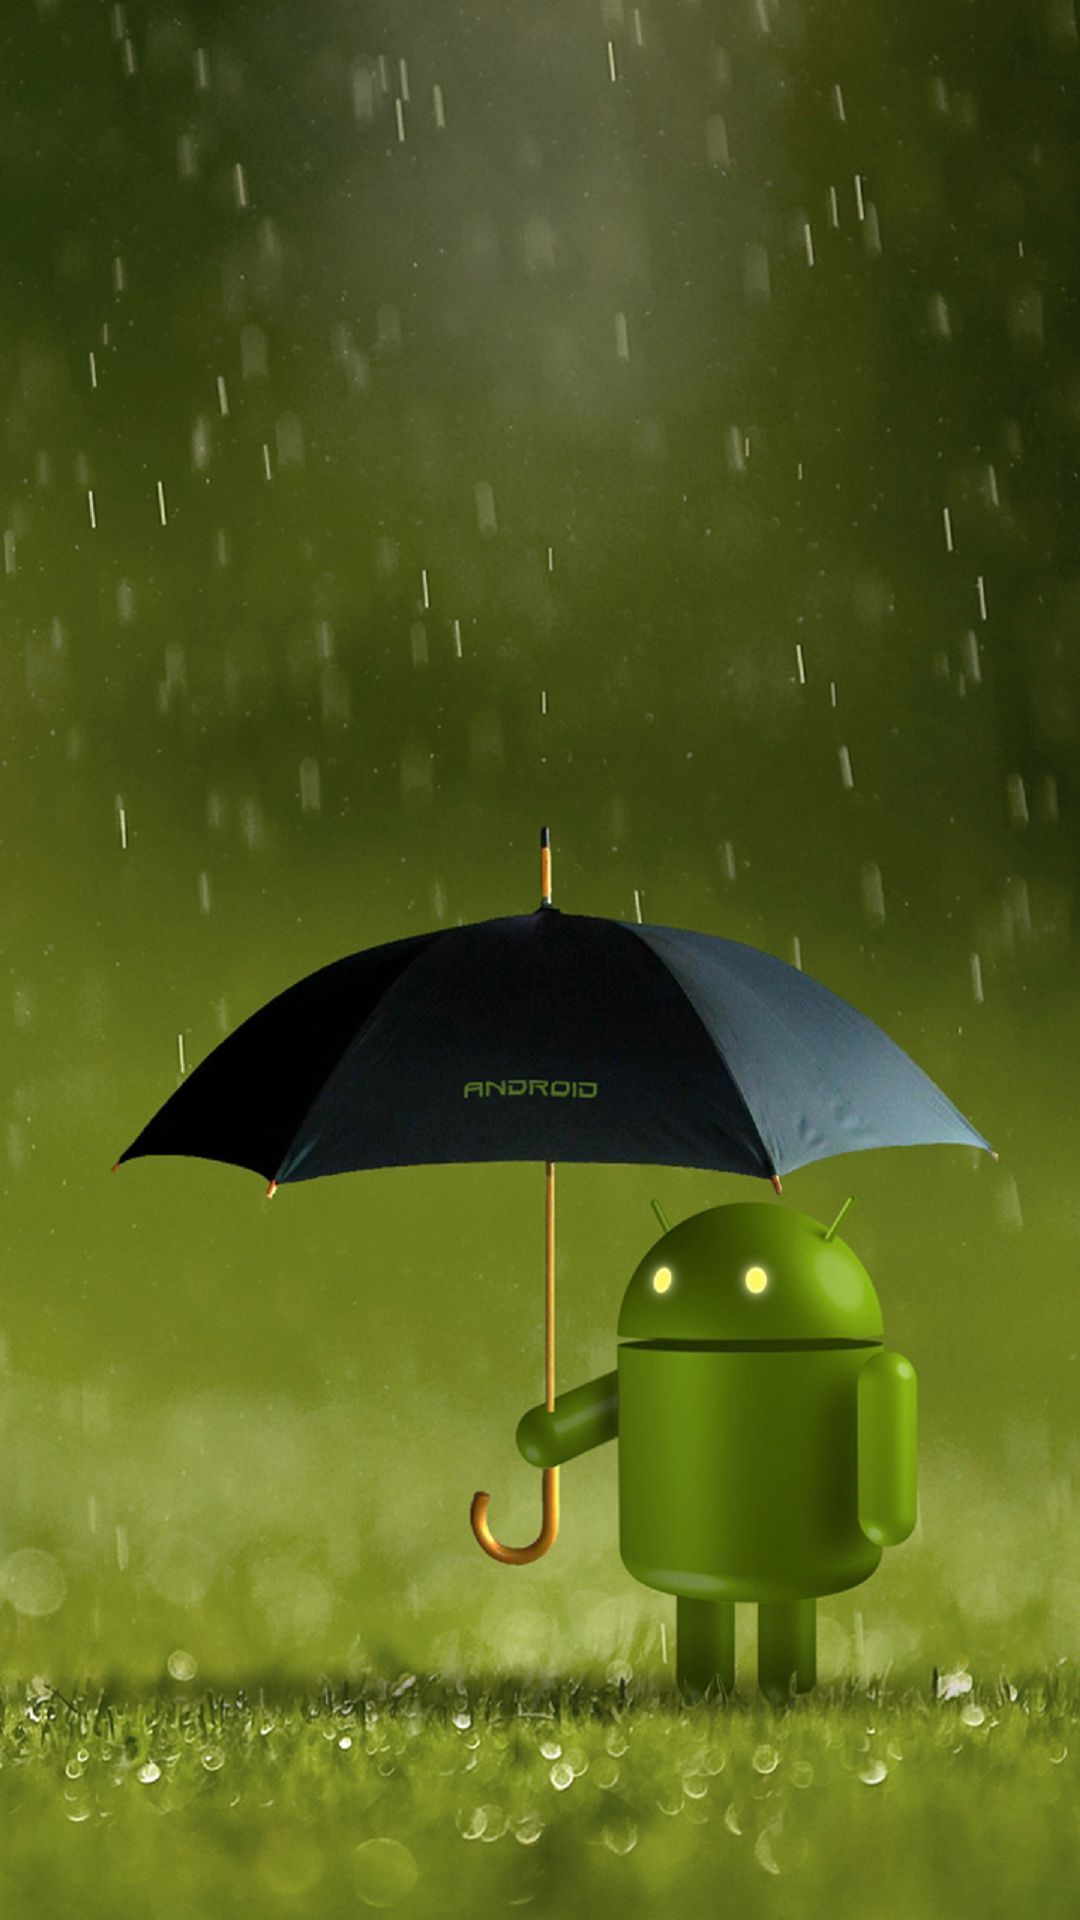 Android Robot Wallpaper For Android - Android Wallpaper Rain - HD Wallpaper 